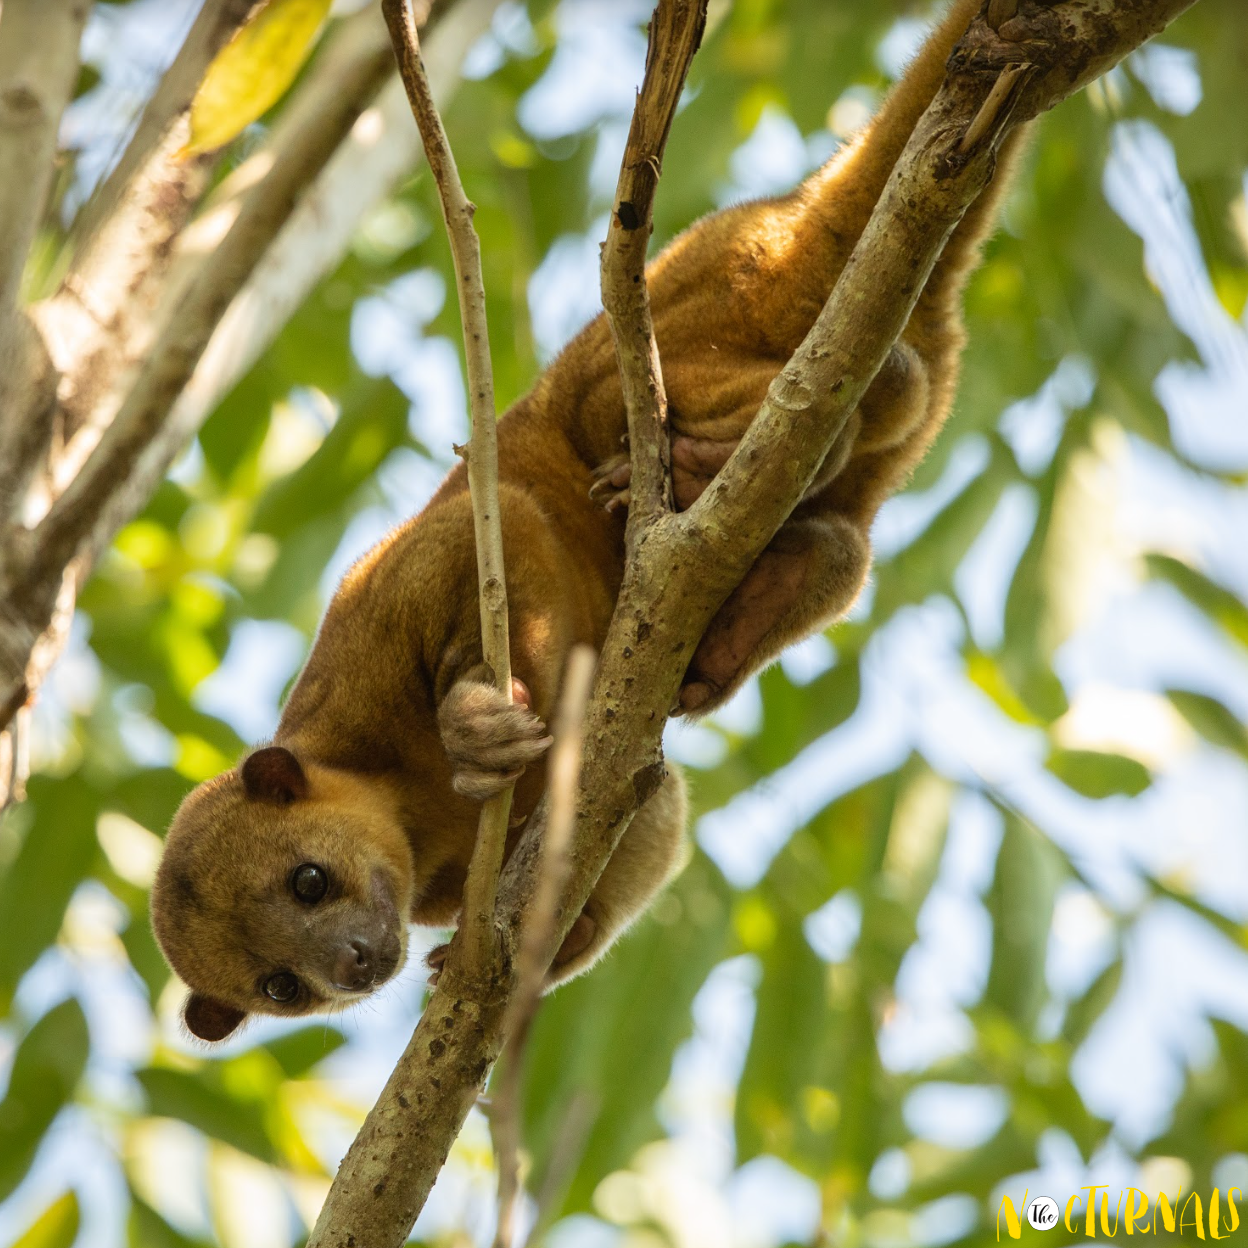 Holding onto a tree branch in the middle of the forest is a kinkajou, a type of monkey. 